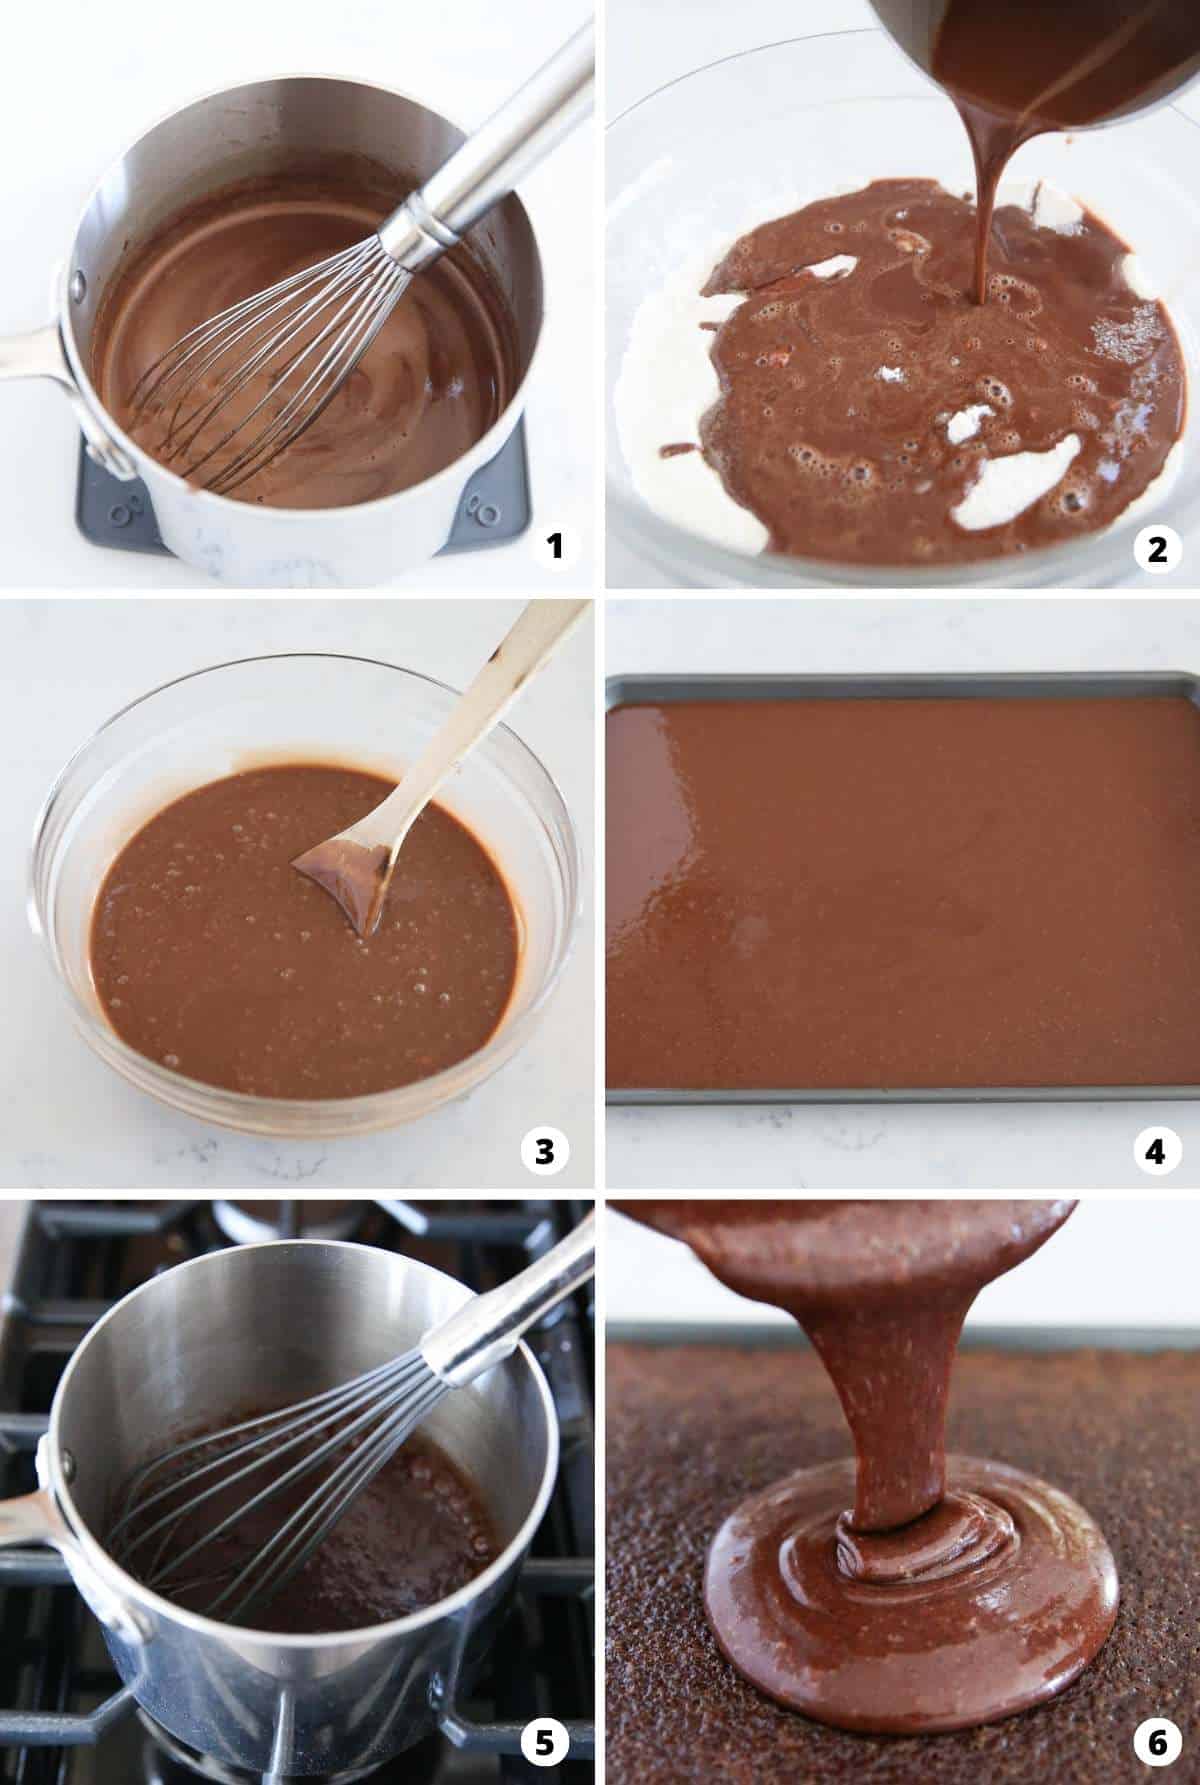 Step by step collage showing how to make texas sheet cake.